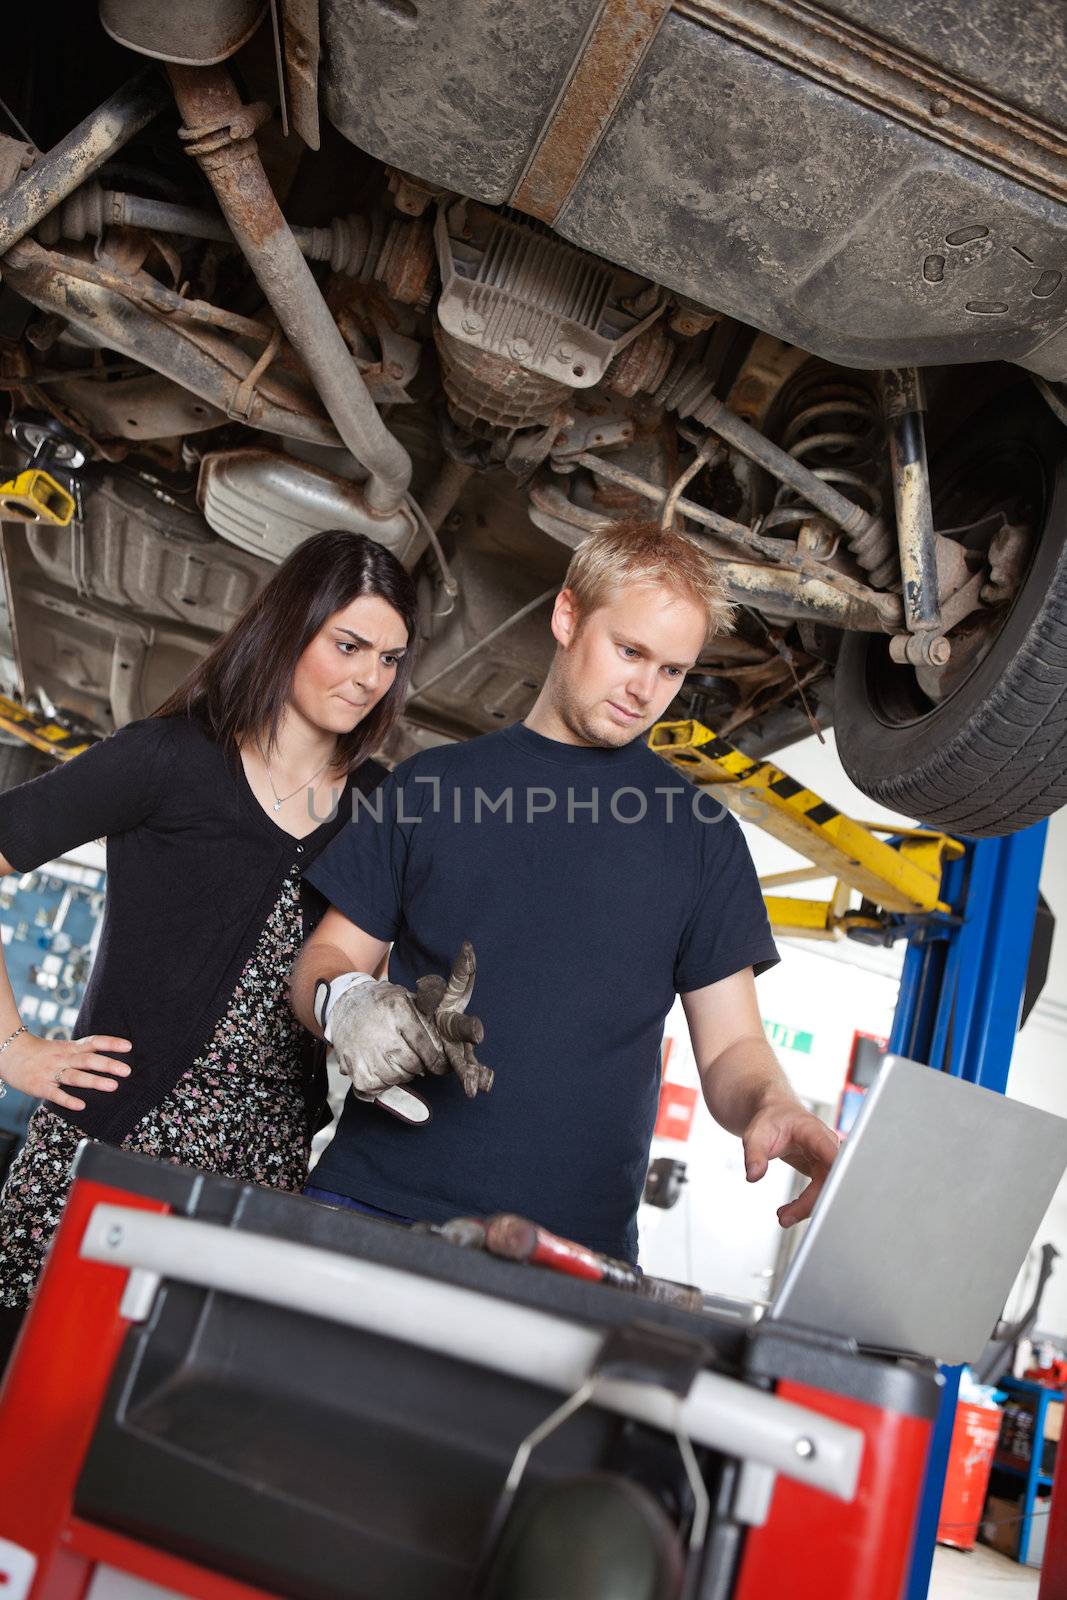 Concentrated man and woman looking at laptop while standing in garage